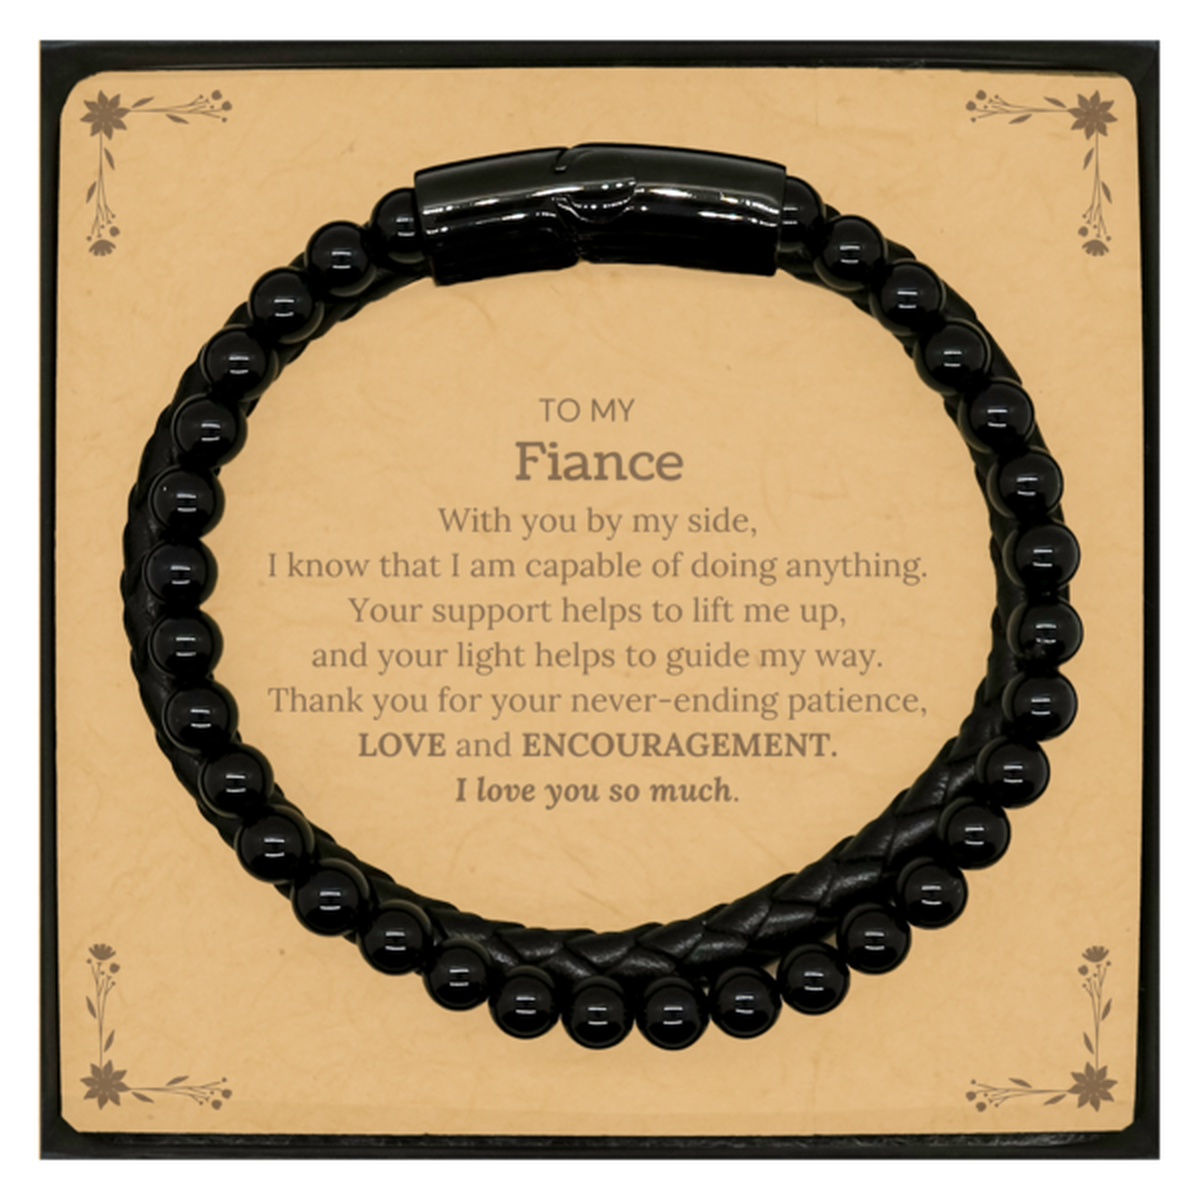 Appreciation Fiance Stone Leather Bracelets Gifts, To My Fiance Birthday Christmas Wedding Keepsake Gifts for Fiance With you by my side, I know that I am capable of doing anything. I love you so much